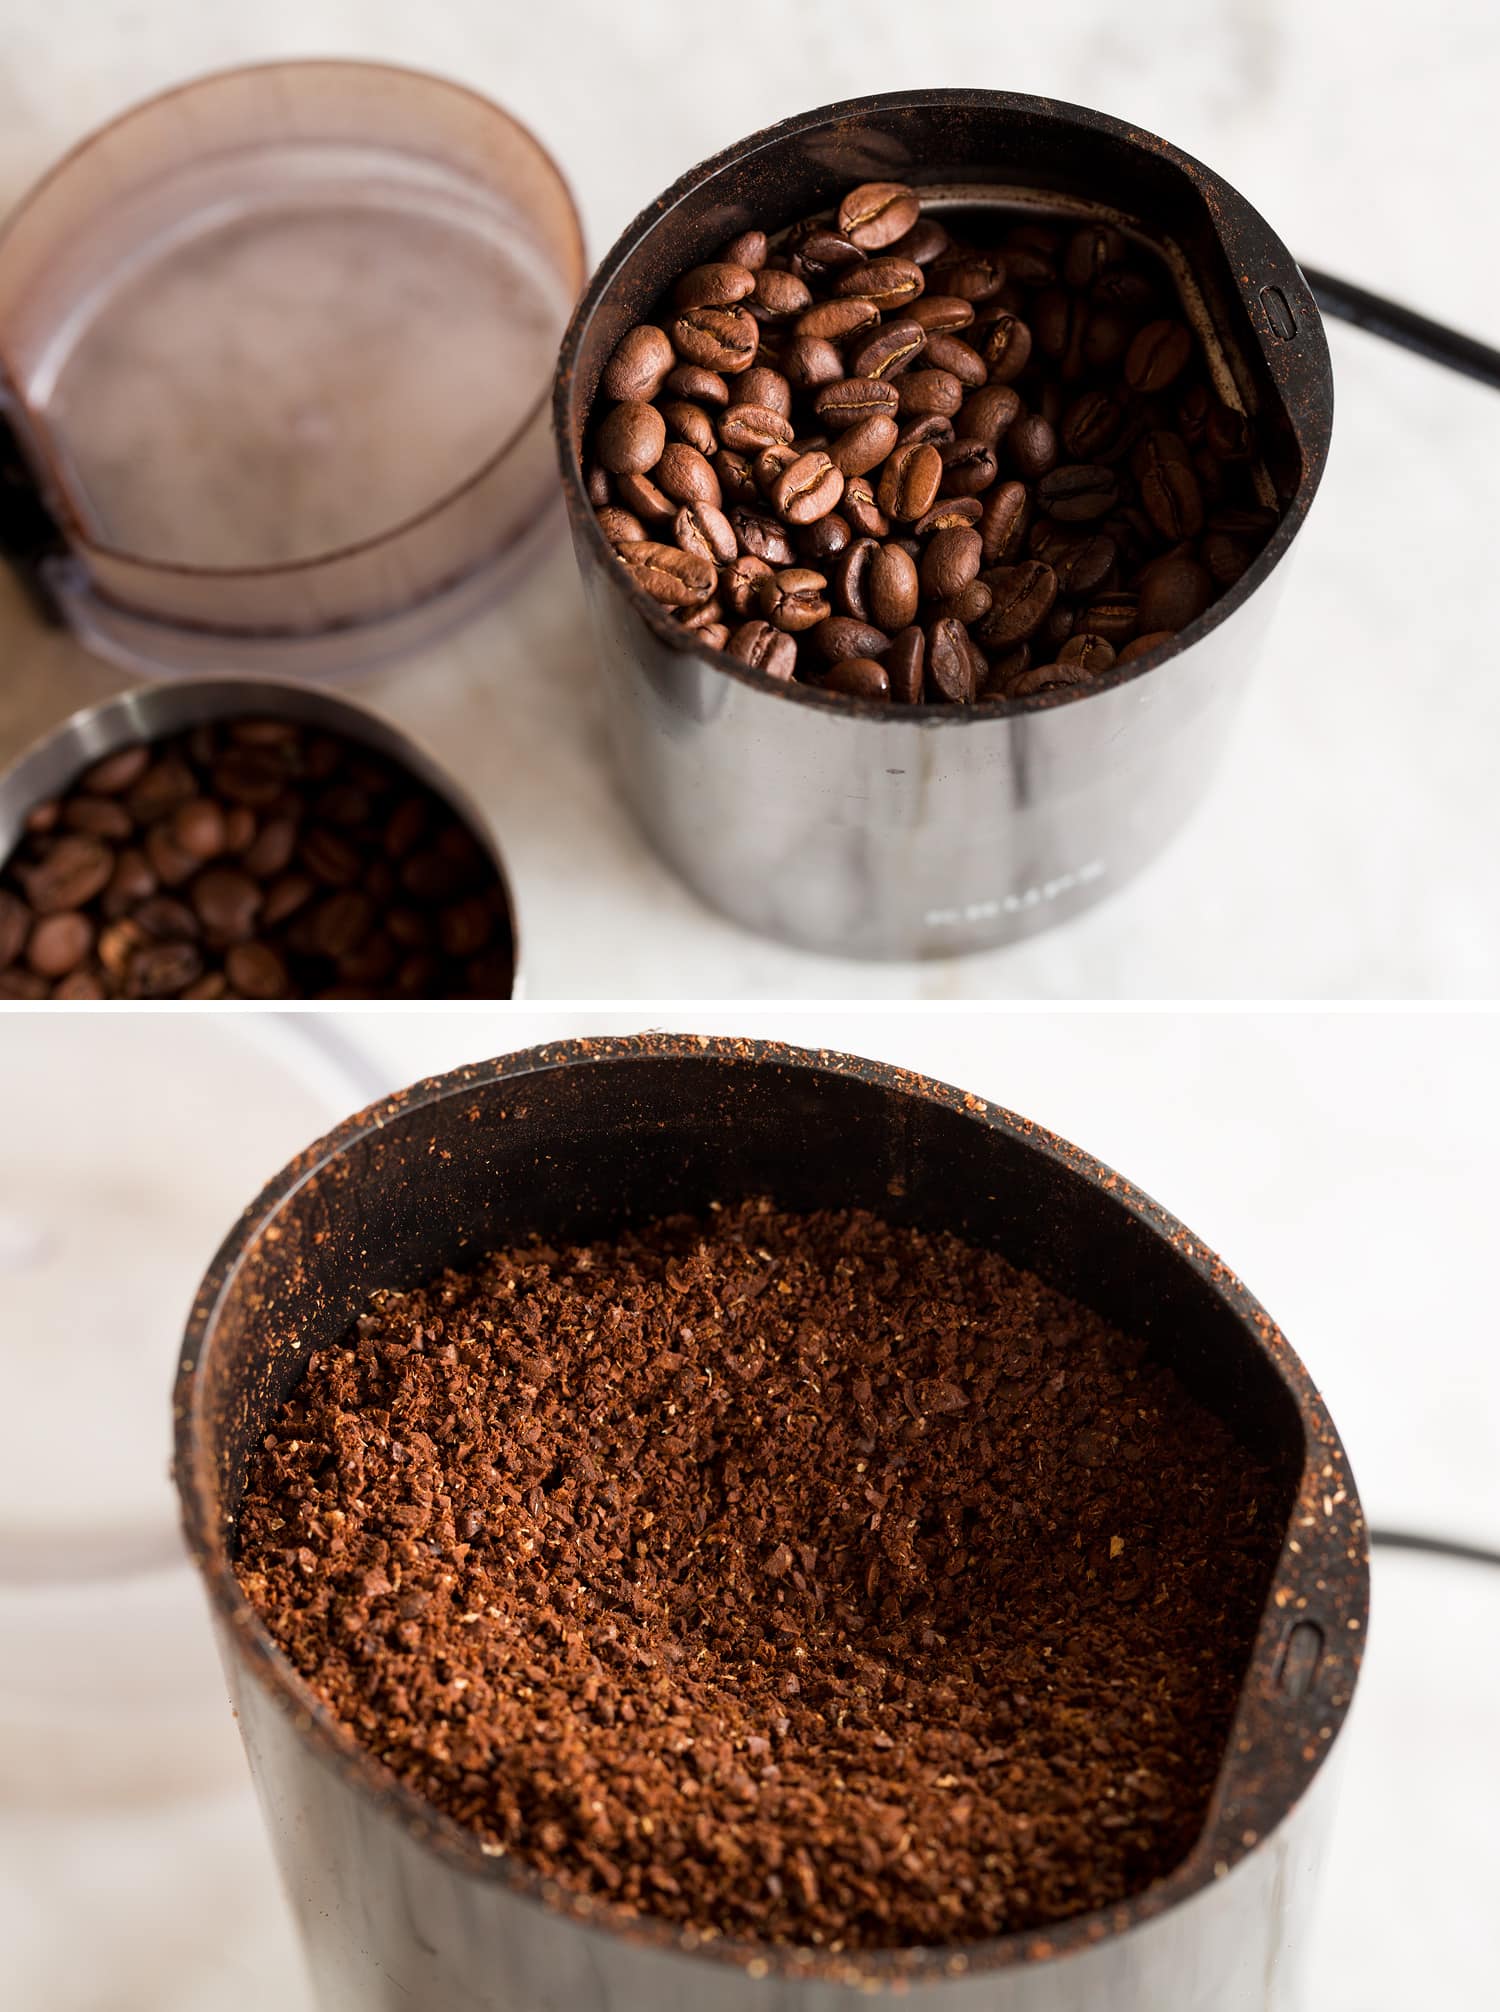 Coffee beans before and after grinding in a coffee grinder.